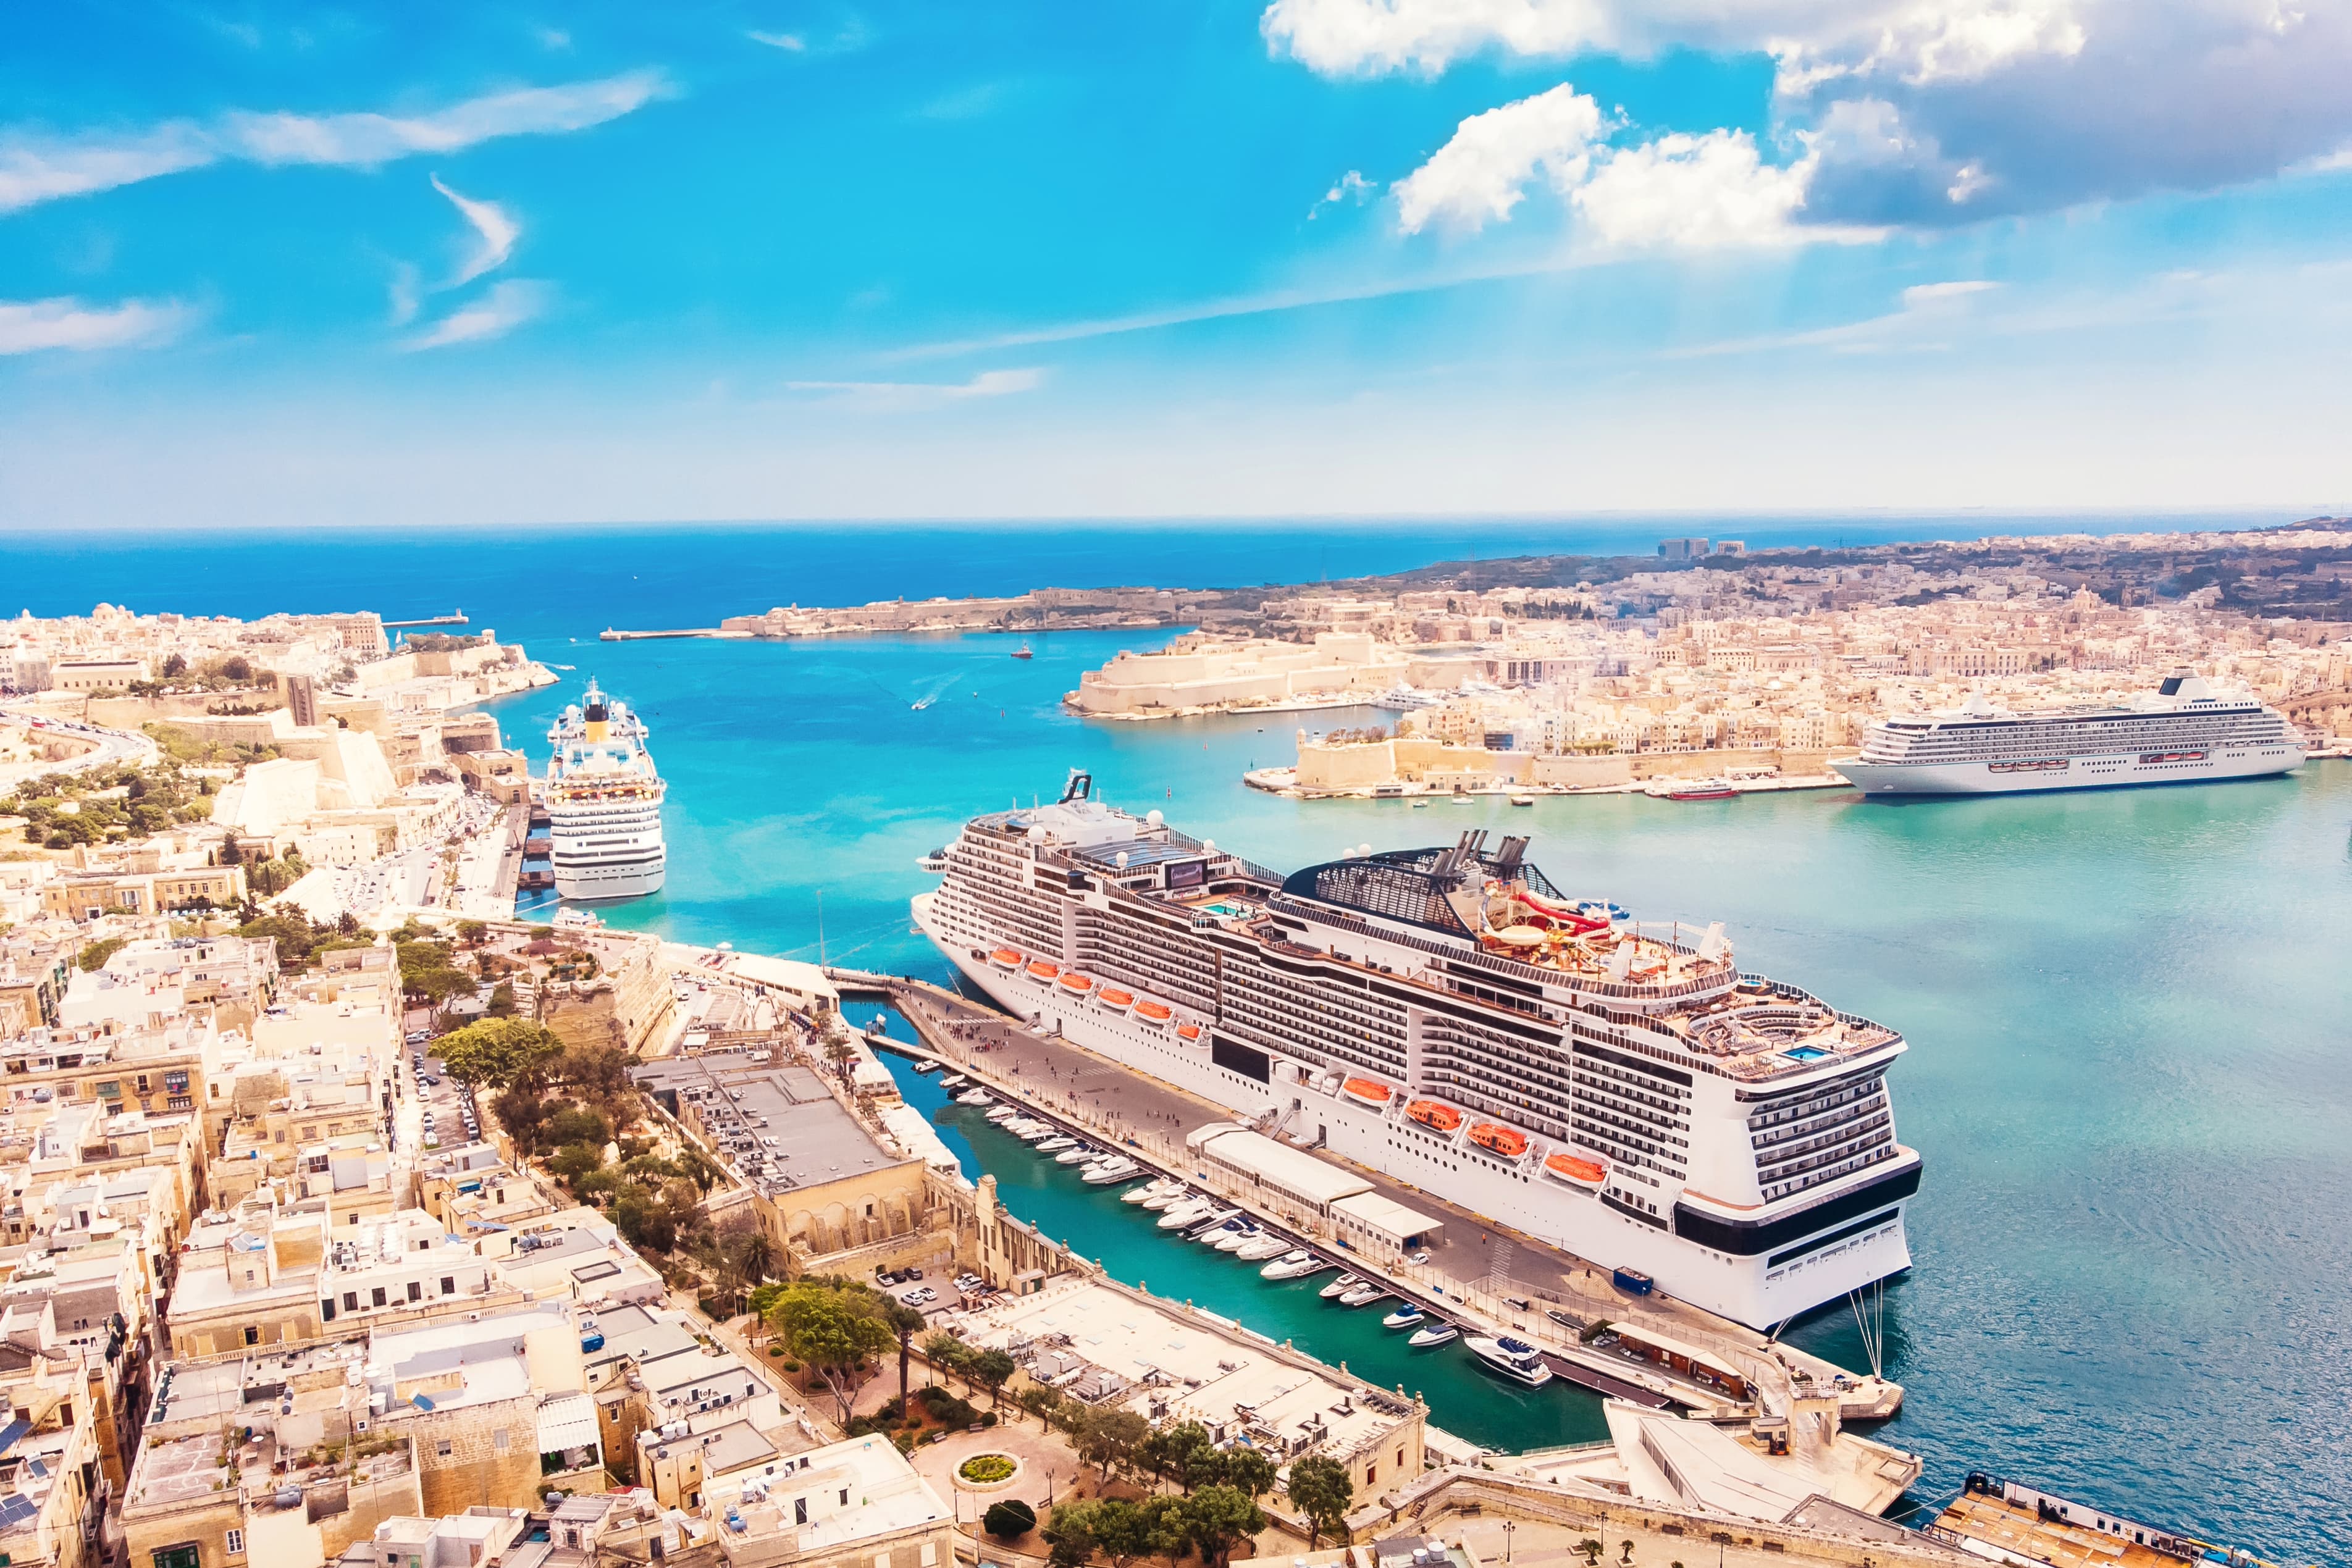 Aerial view photo of cruise ship liners at the port of Valletta, Malta